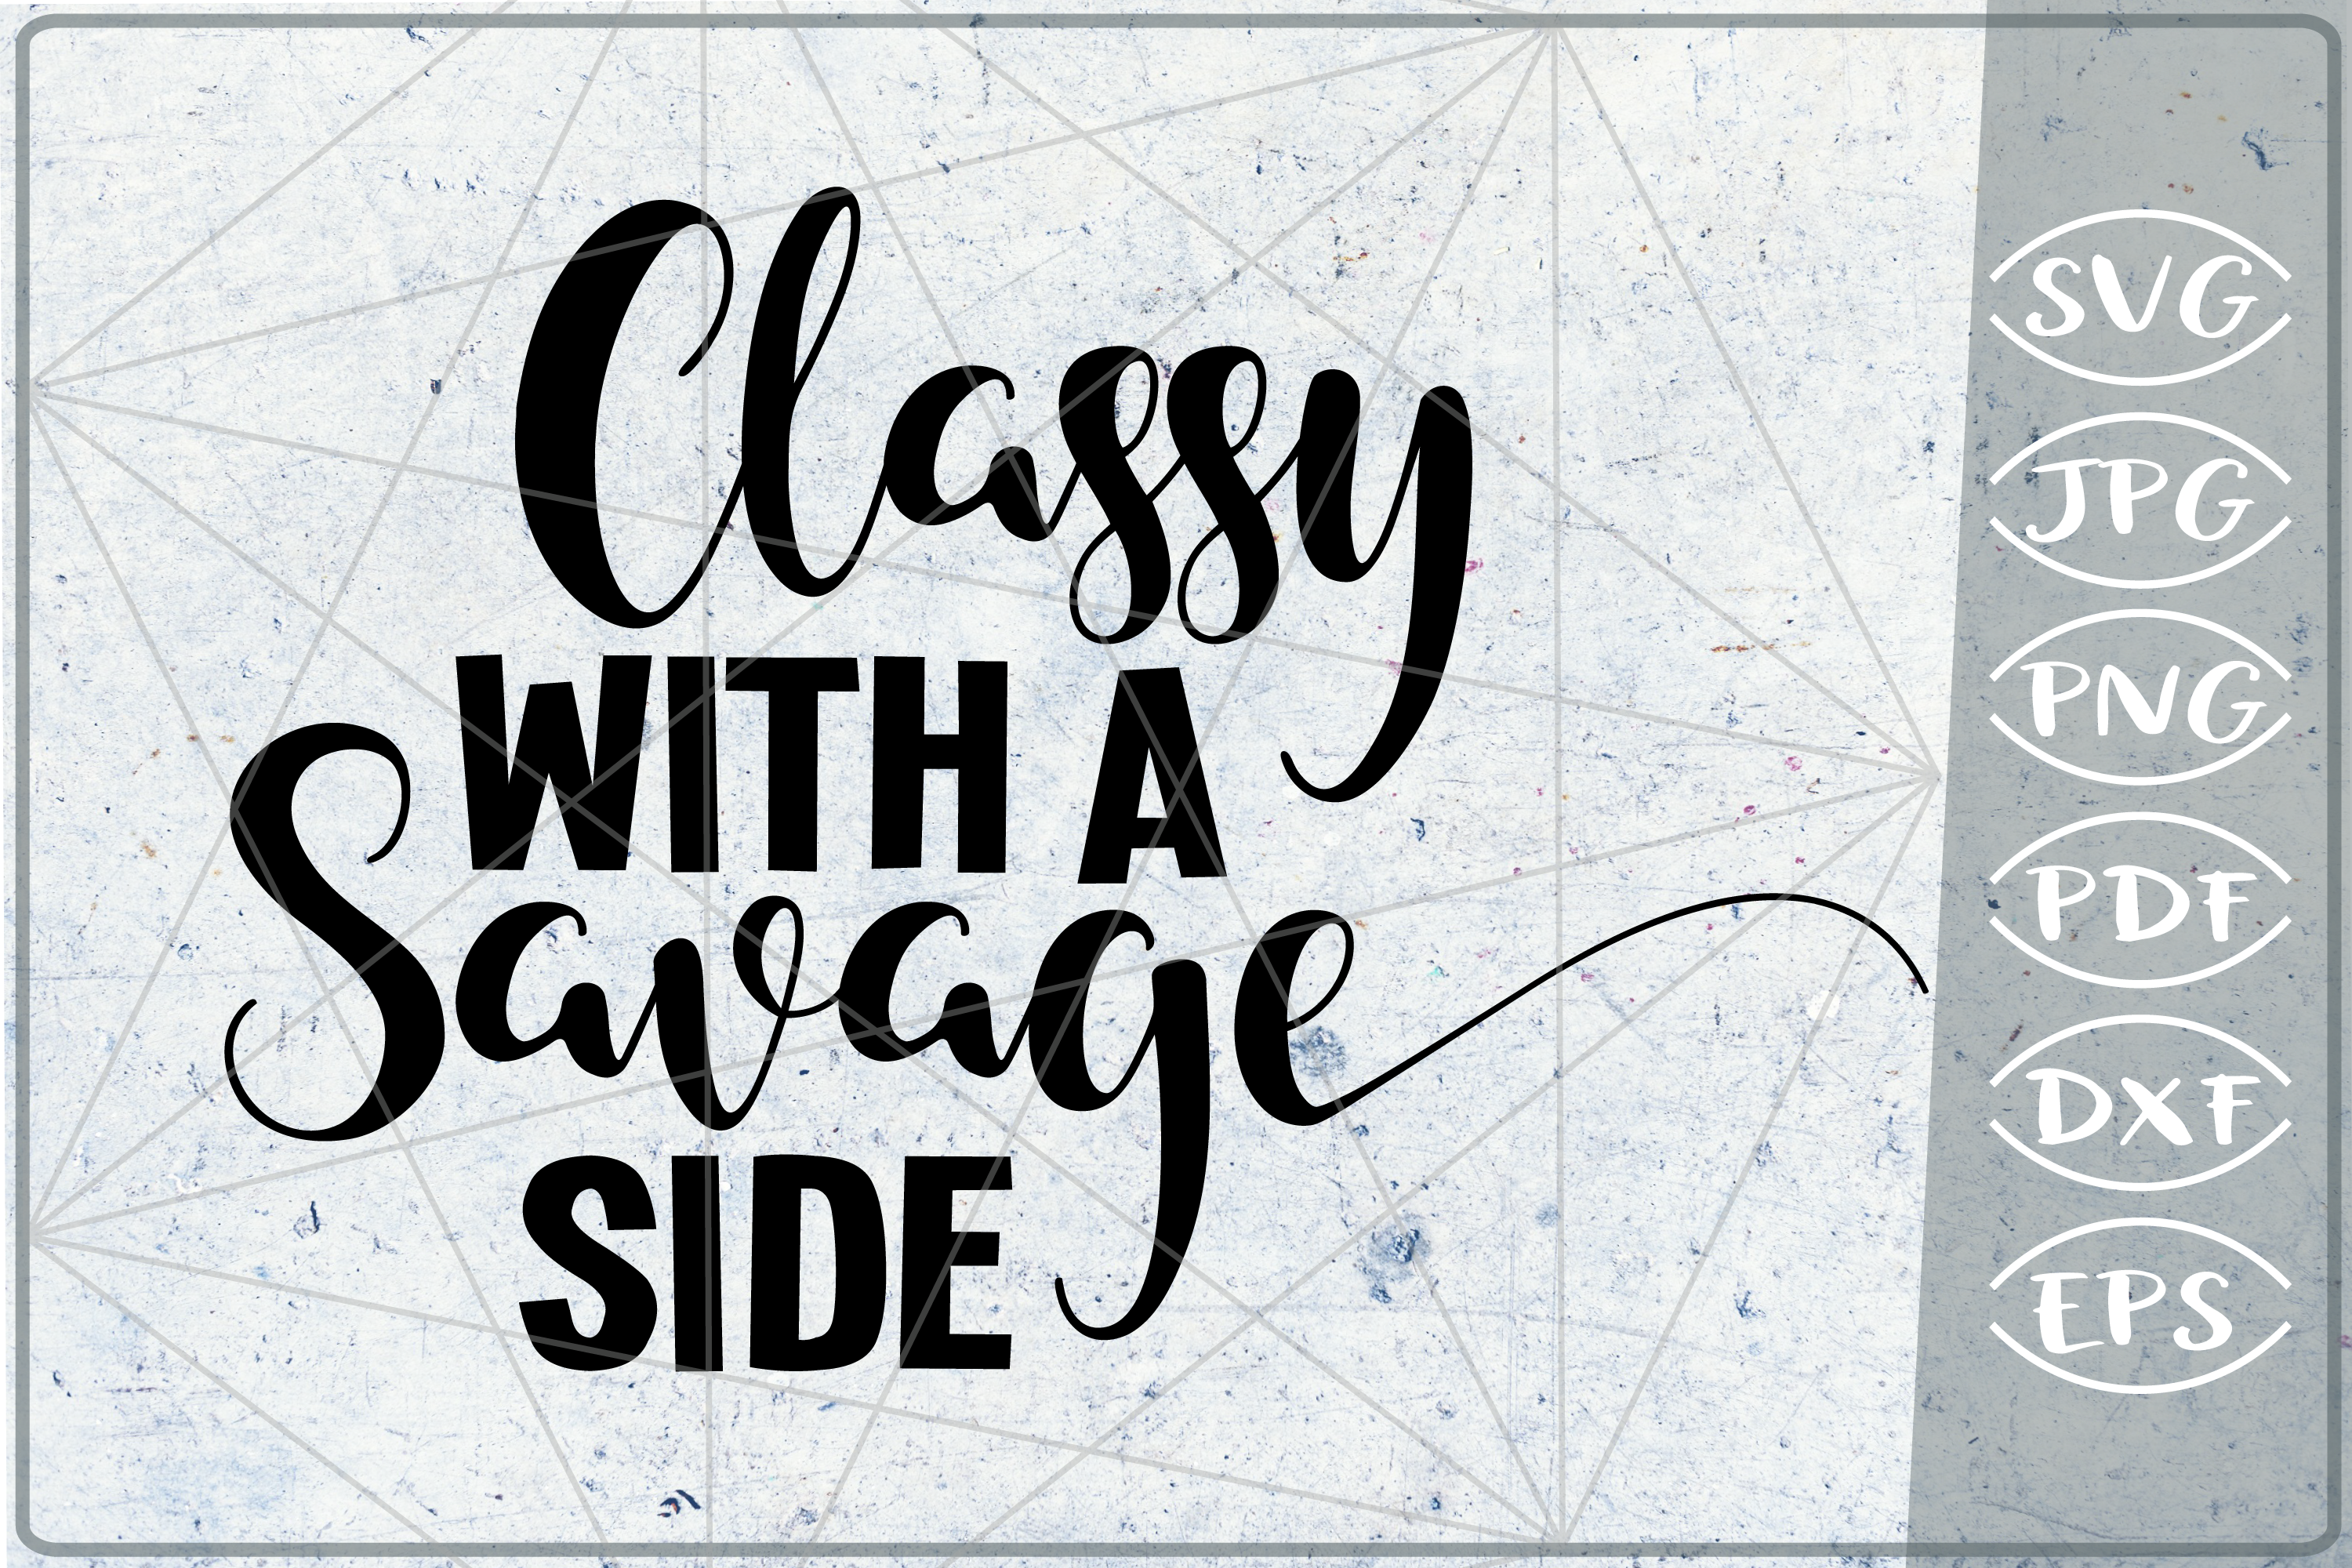 Classy with a savage side Quote SVG Cutting File (264127) | Cut Files ...